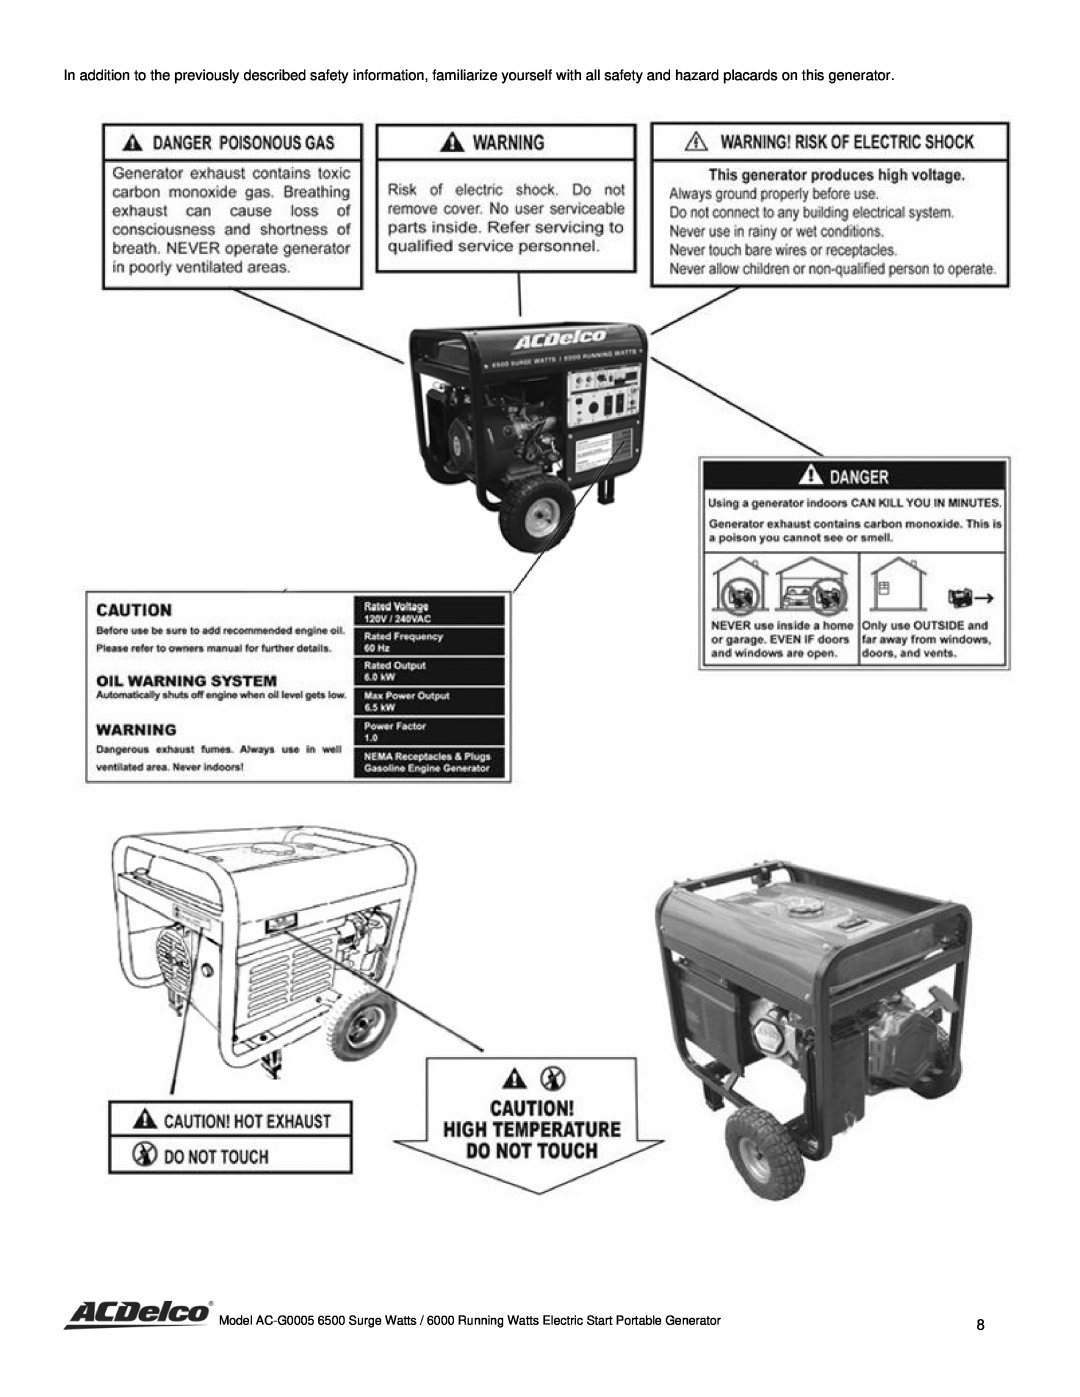 ACDelco AC-G0005 instruction manual 